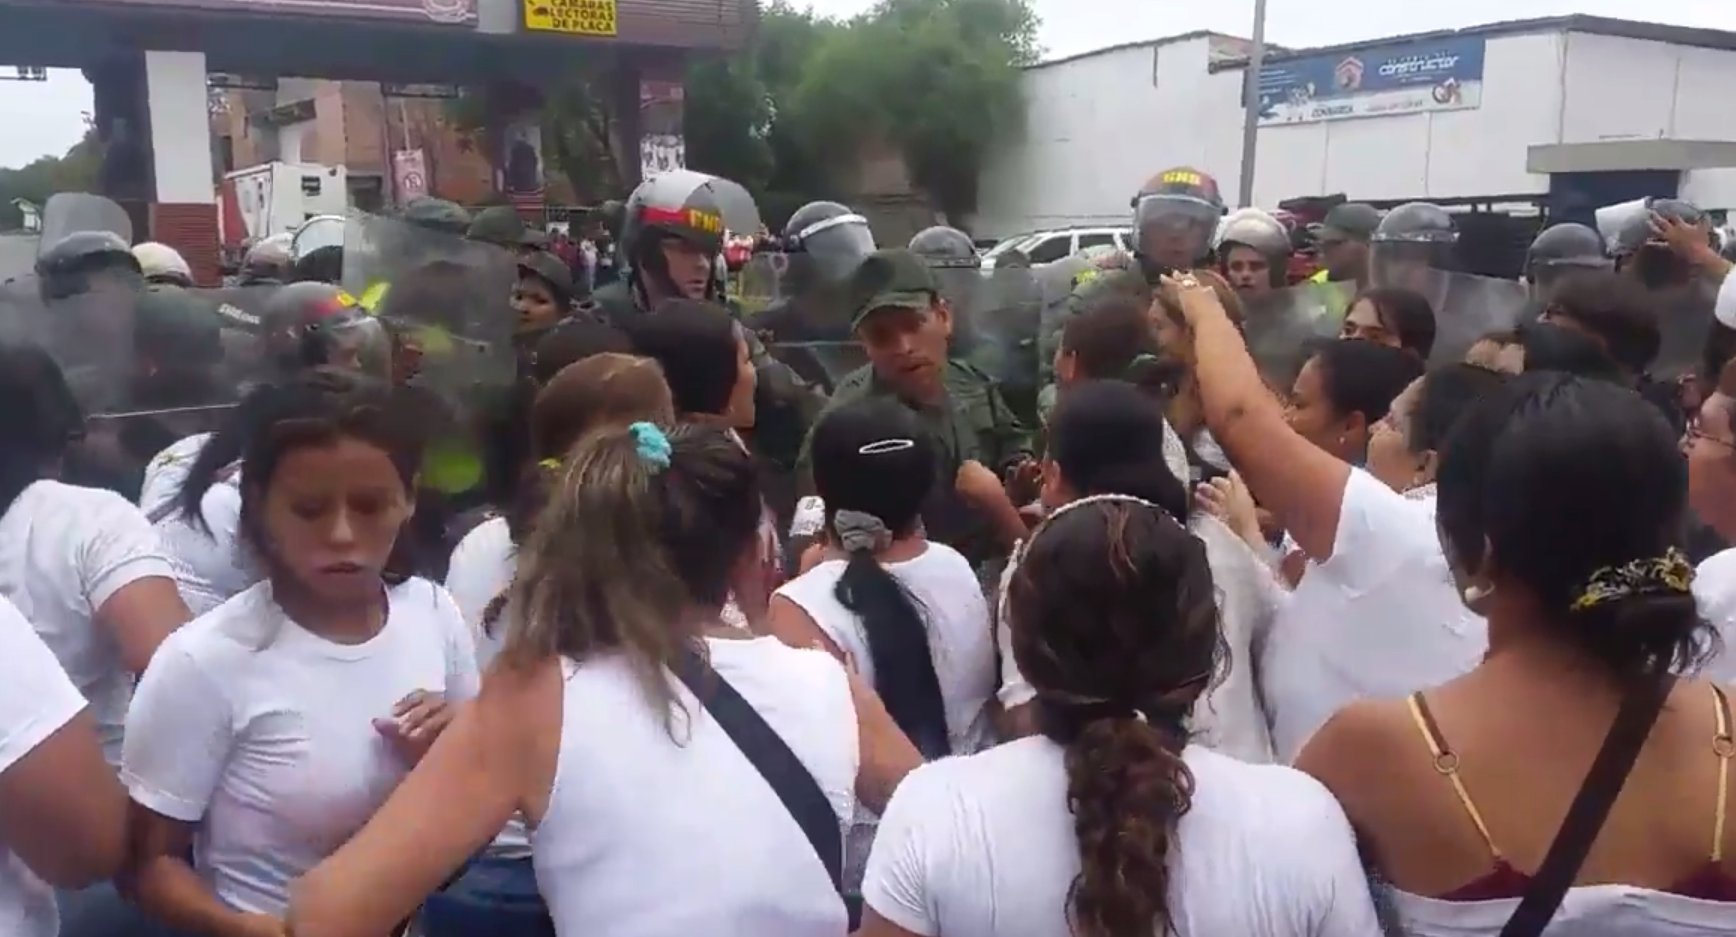  Women confront Venezuelan national guardsmen at a crossing point on Venezuela's border with Colombia. Twitter/@Unaybayona 